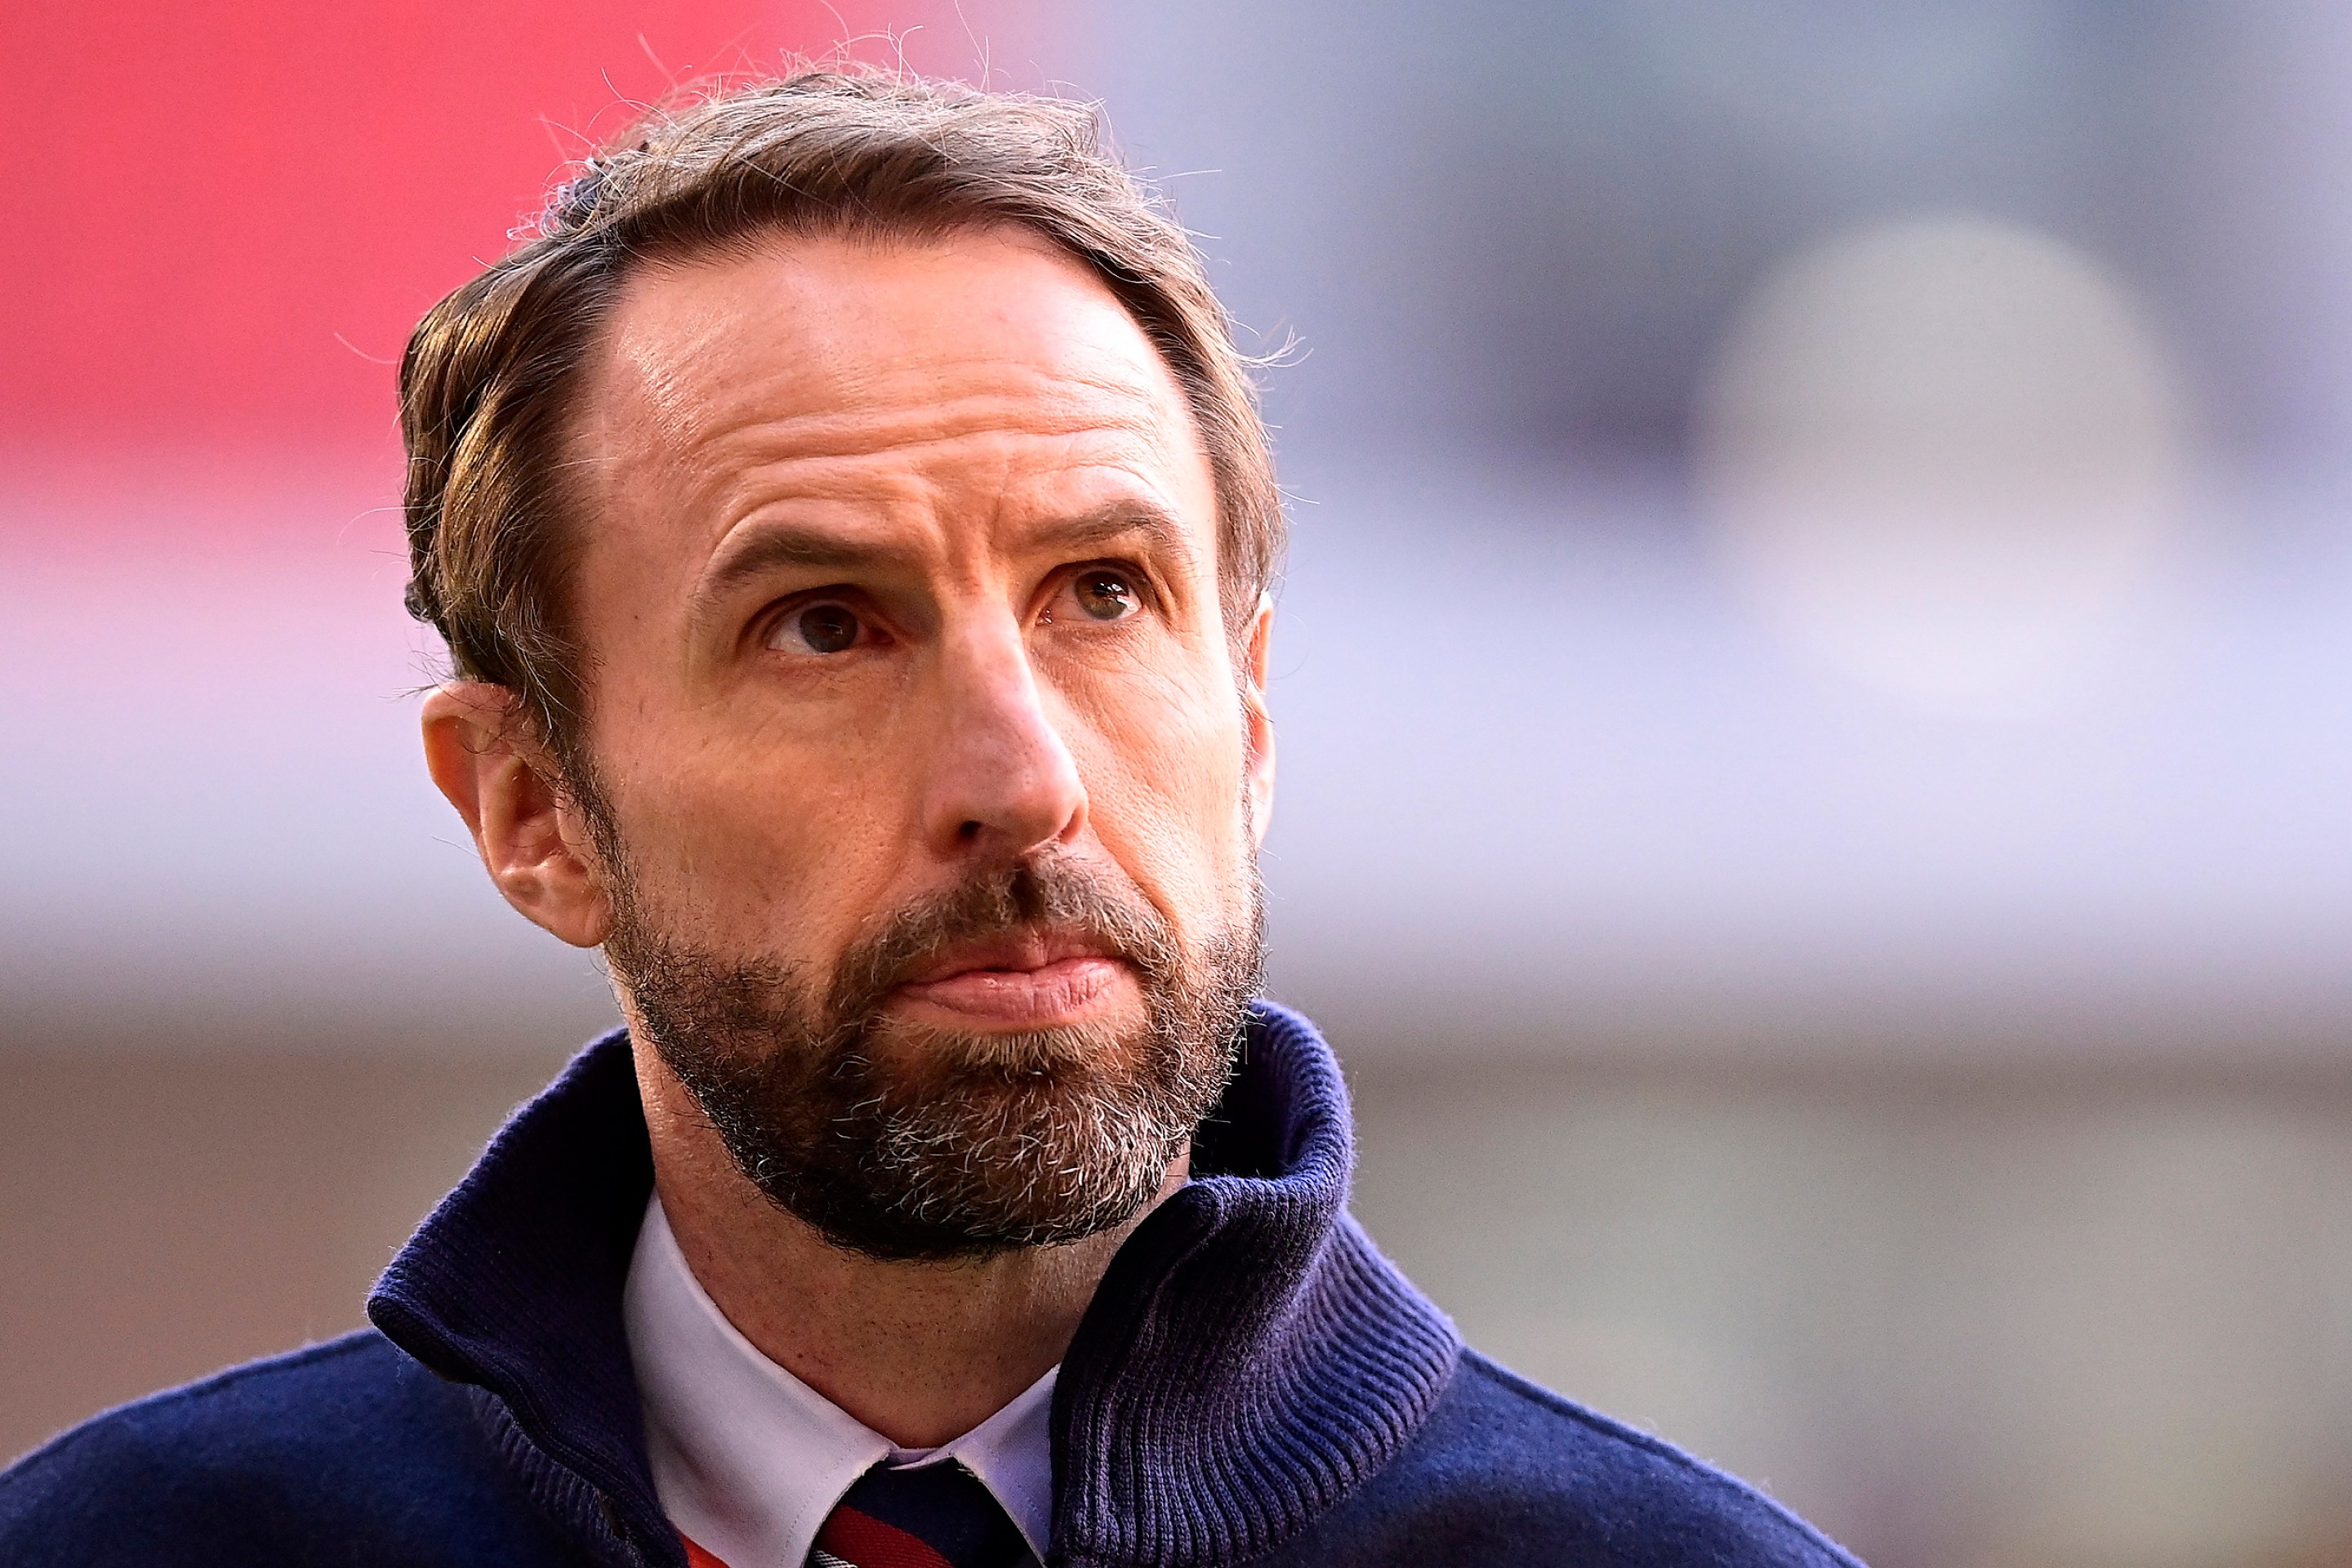 Gareth Southgate, Manager of England looks on prior to the FIFA World Cup 2022 Qatar qualifying match between Albania and England at the Qemal Stafa Stadium on March 28, 2021 in Tirana, Albania.